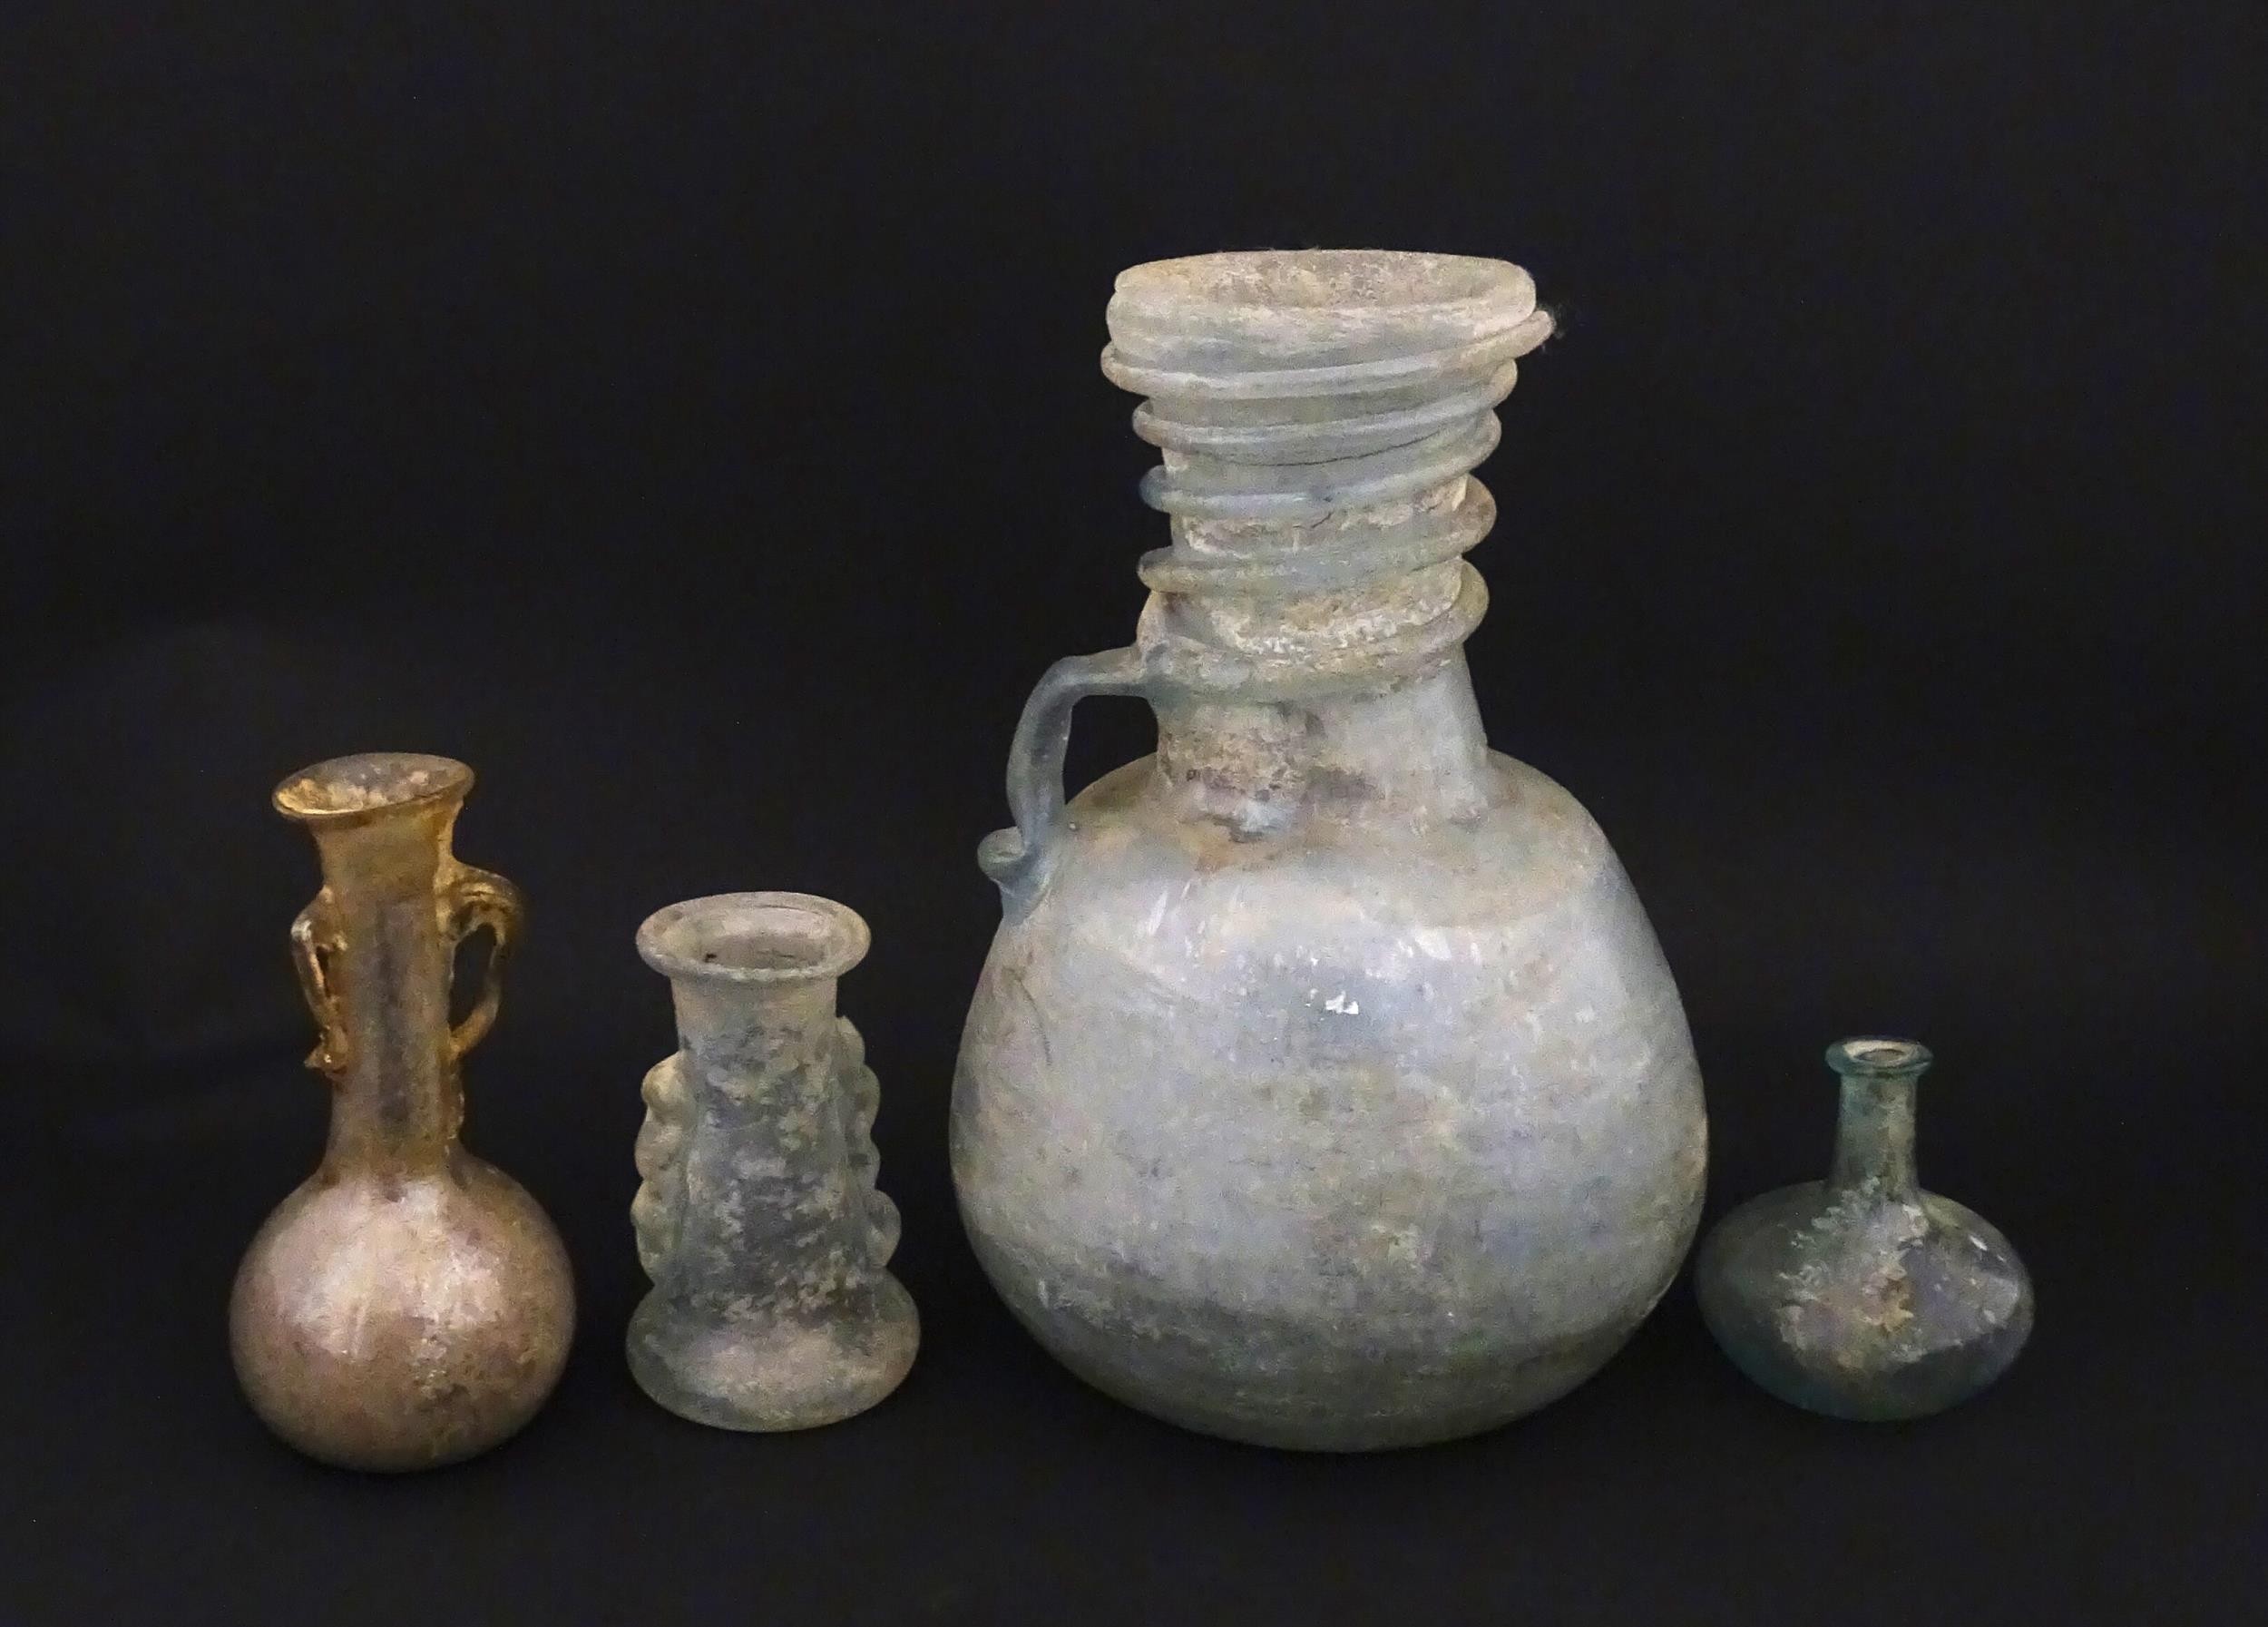 Four glass vases in the Roman style with iridescent finish, some with trail detail. Largest